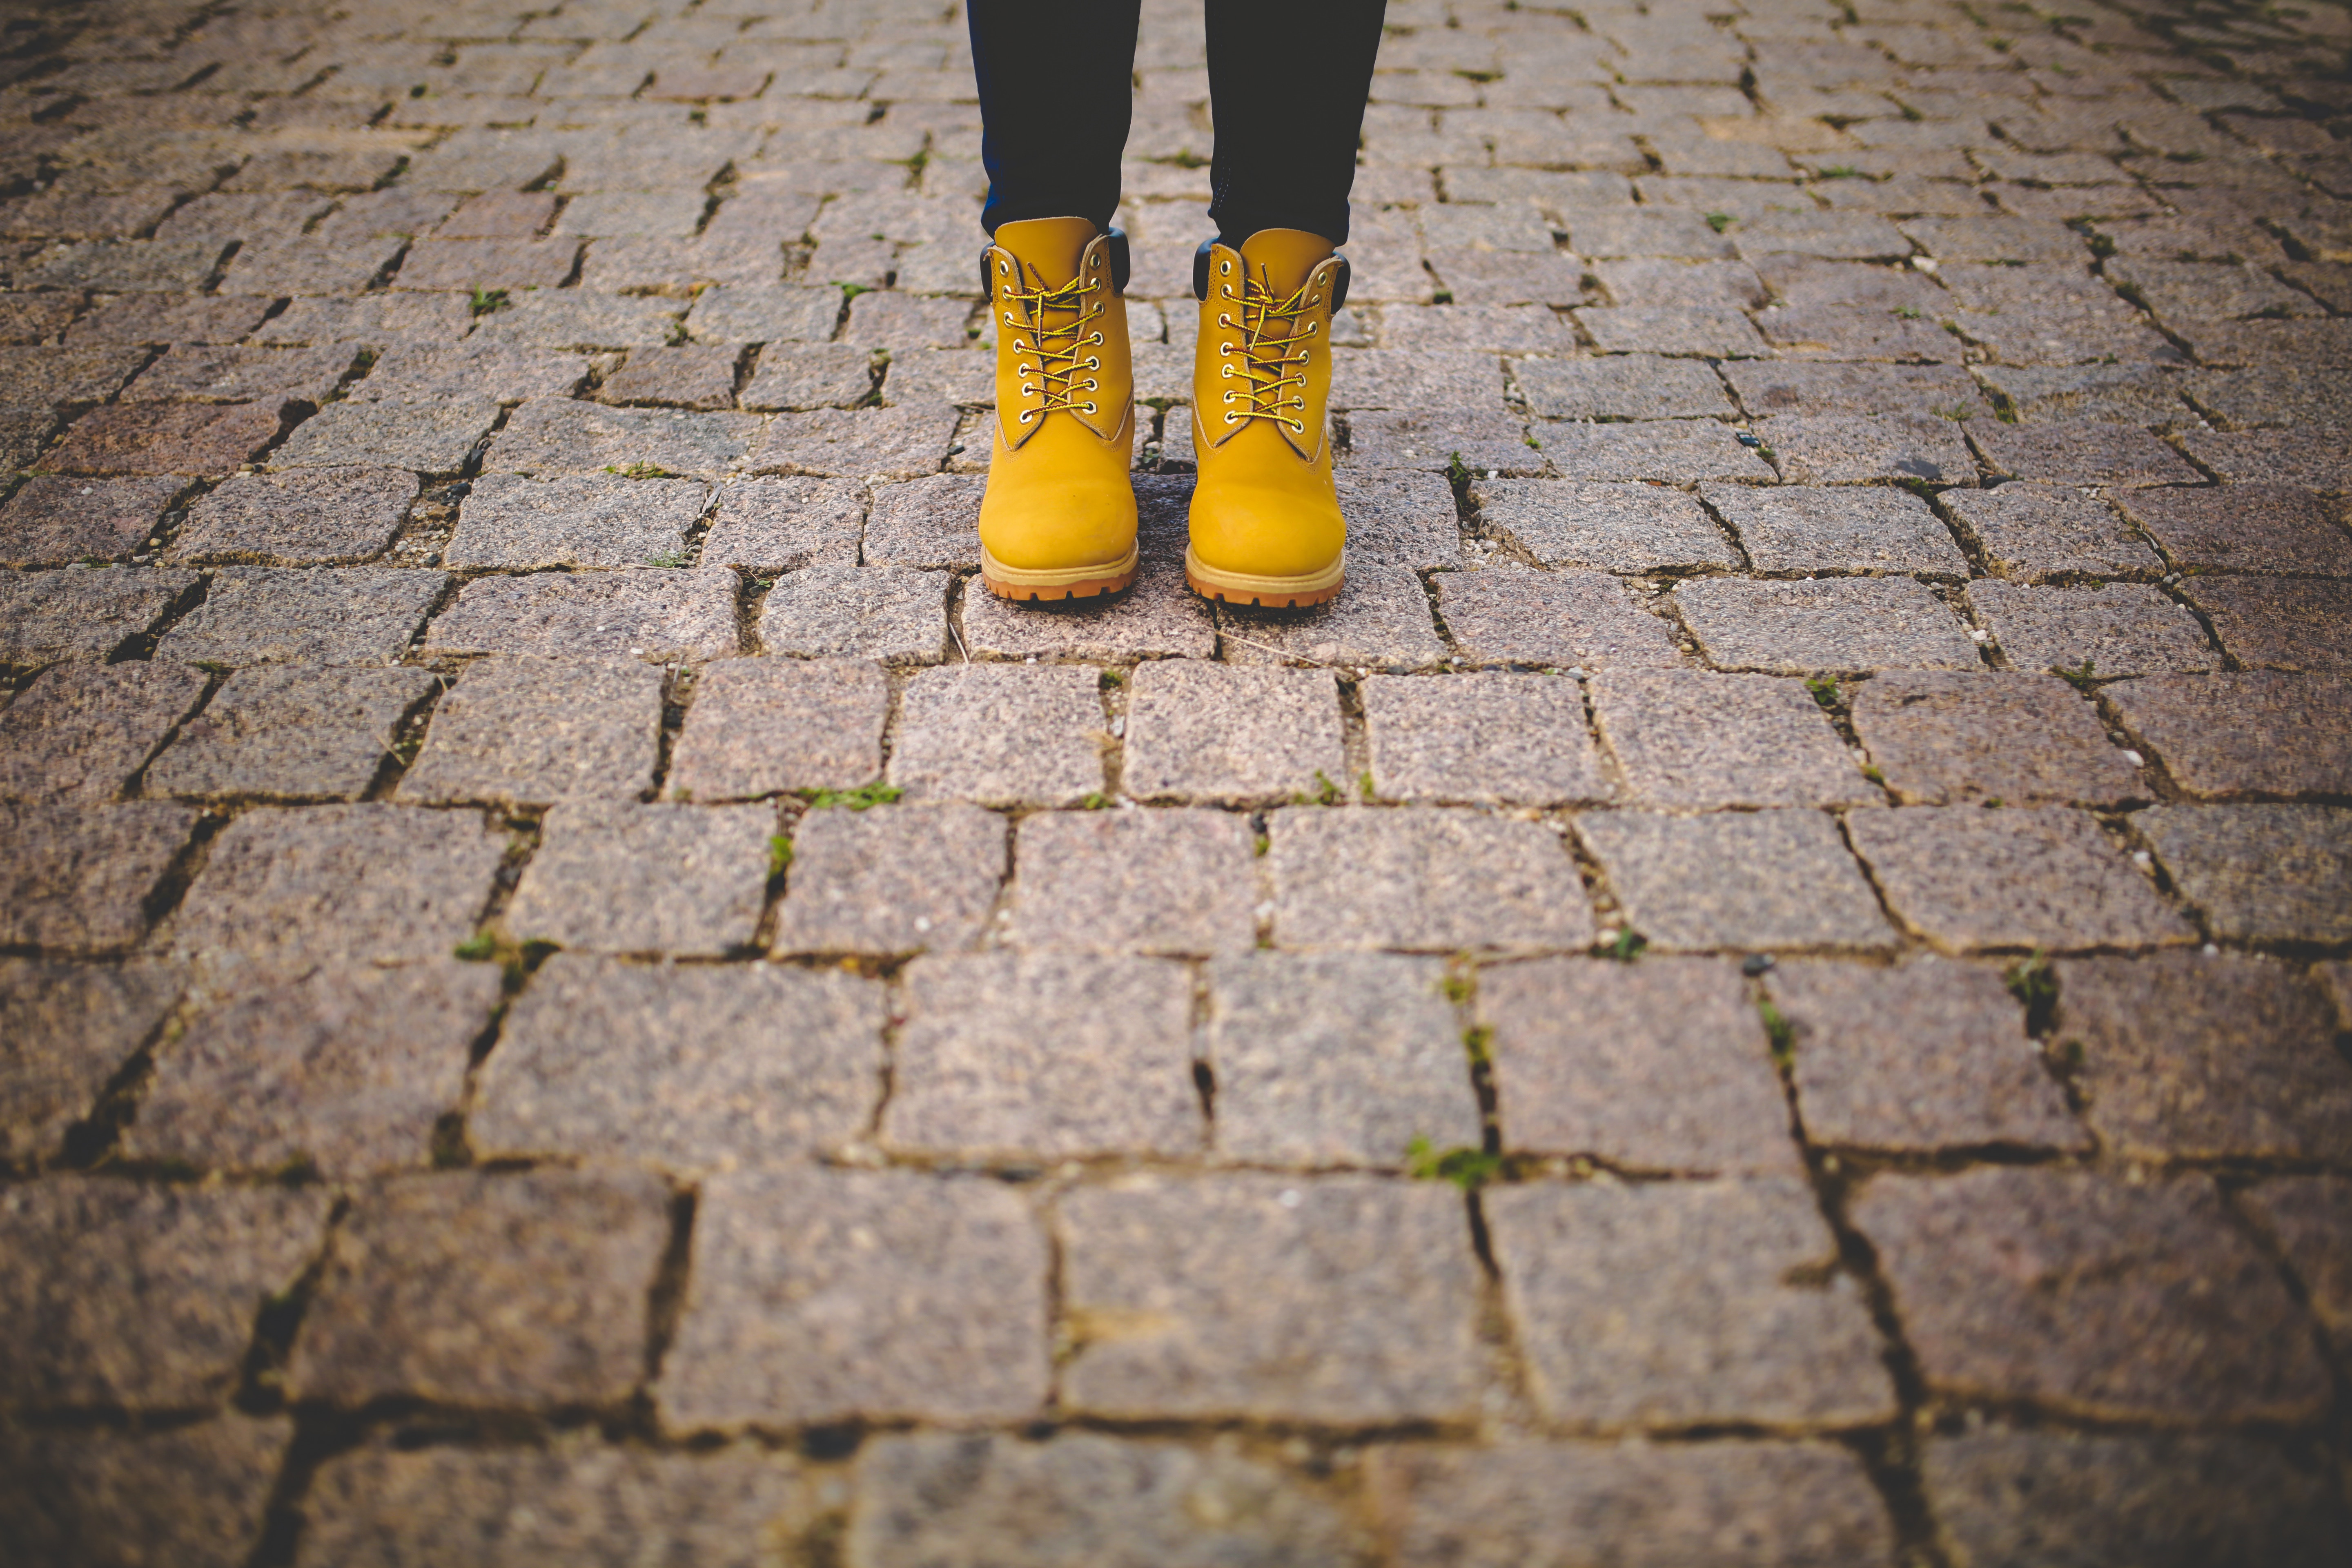 Phone Background Full HD shoes, boots, footwear, minimalism